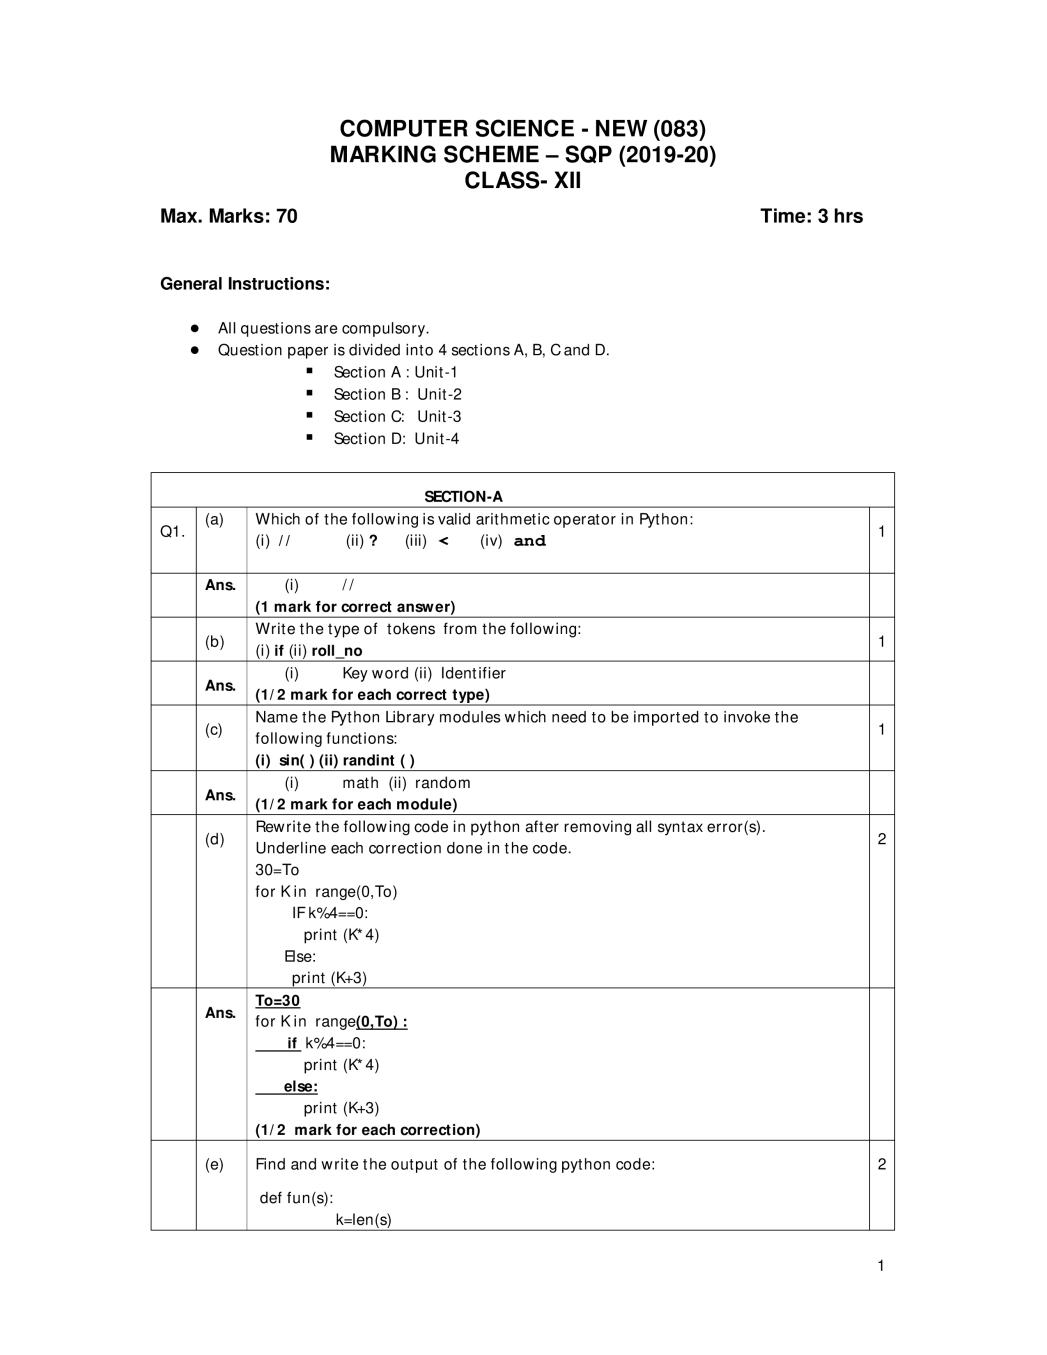 CBSE Class 12 Marking Scheme 2020 for Computer Science New - Page 1